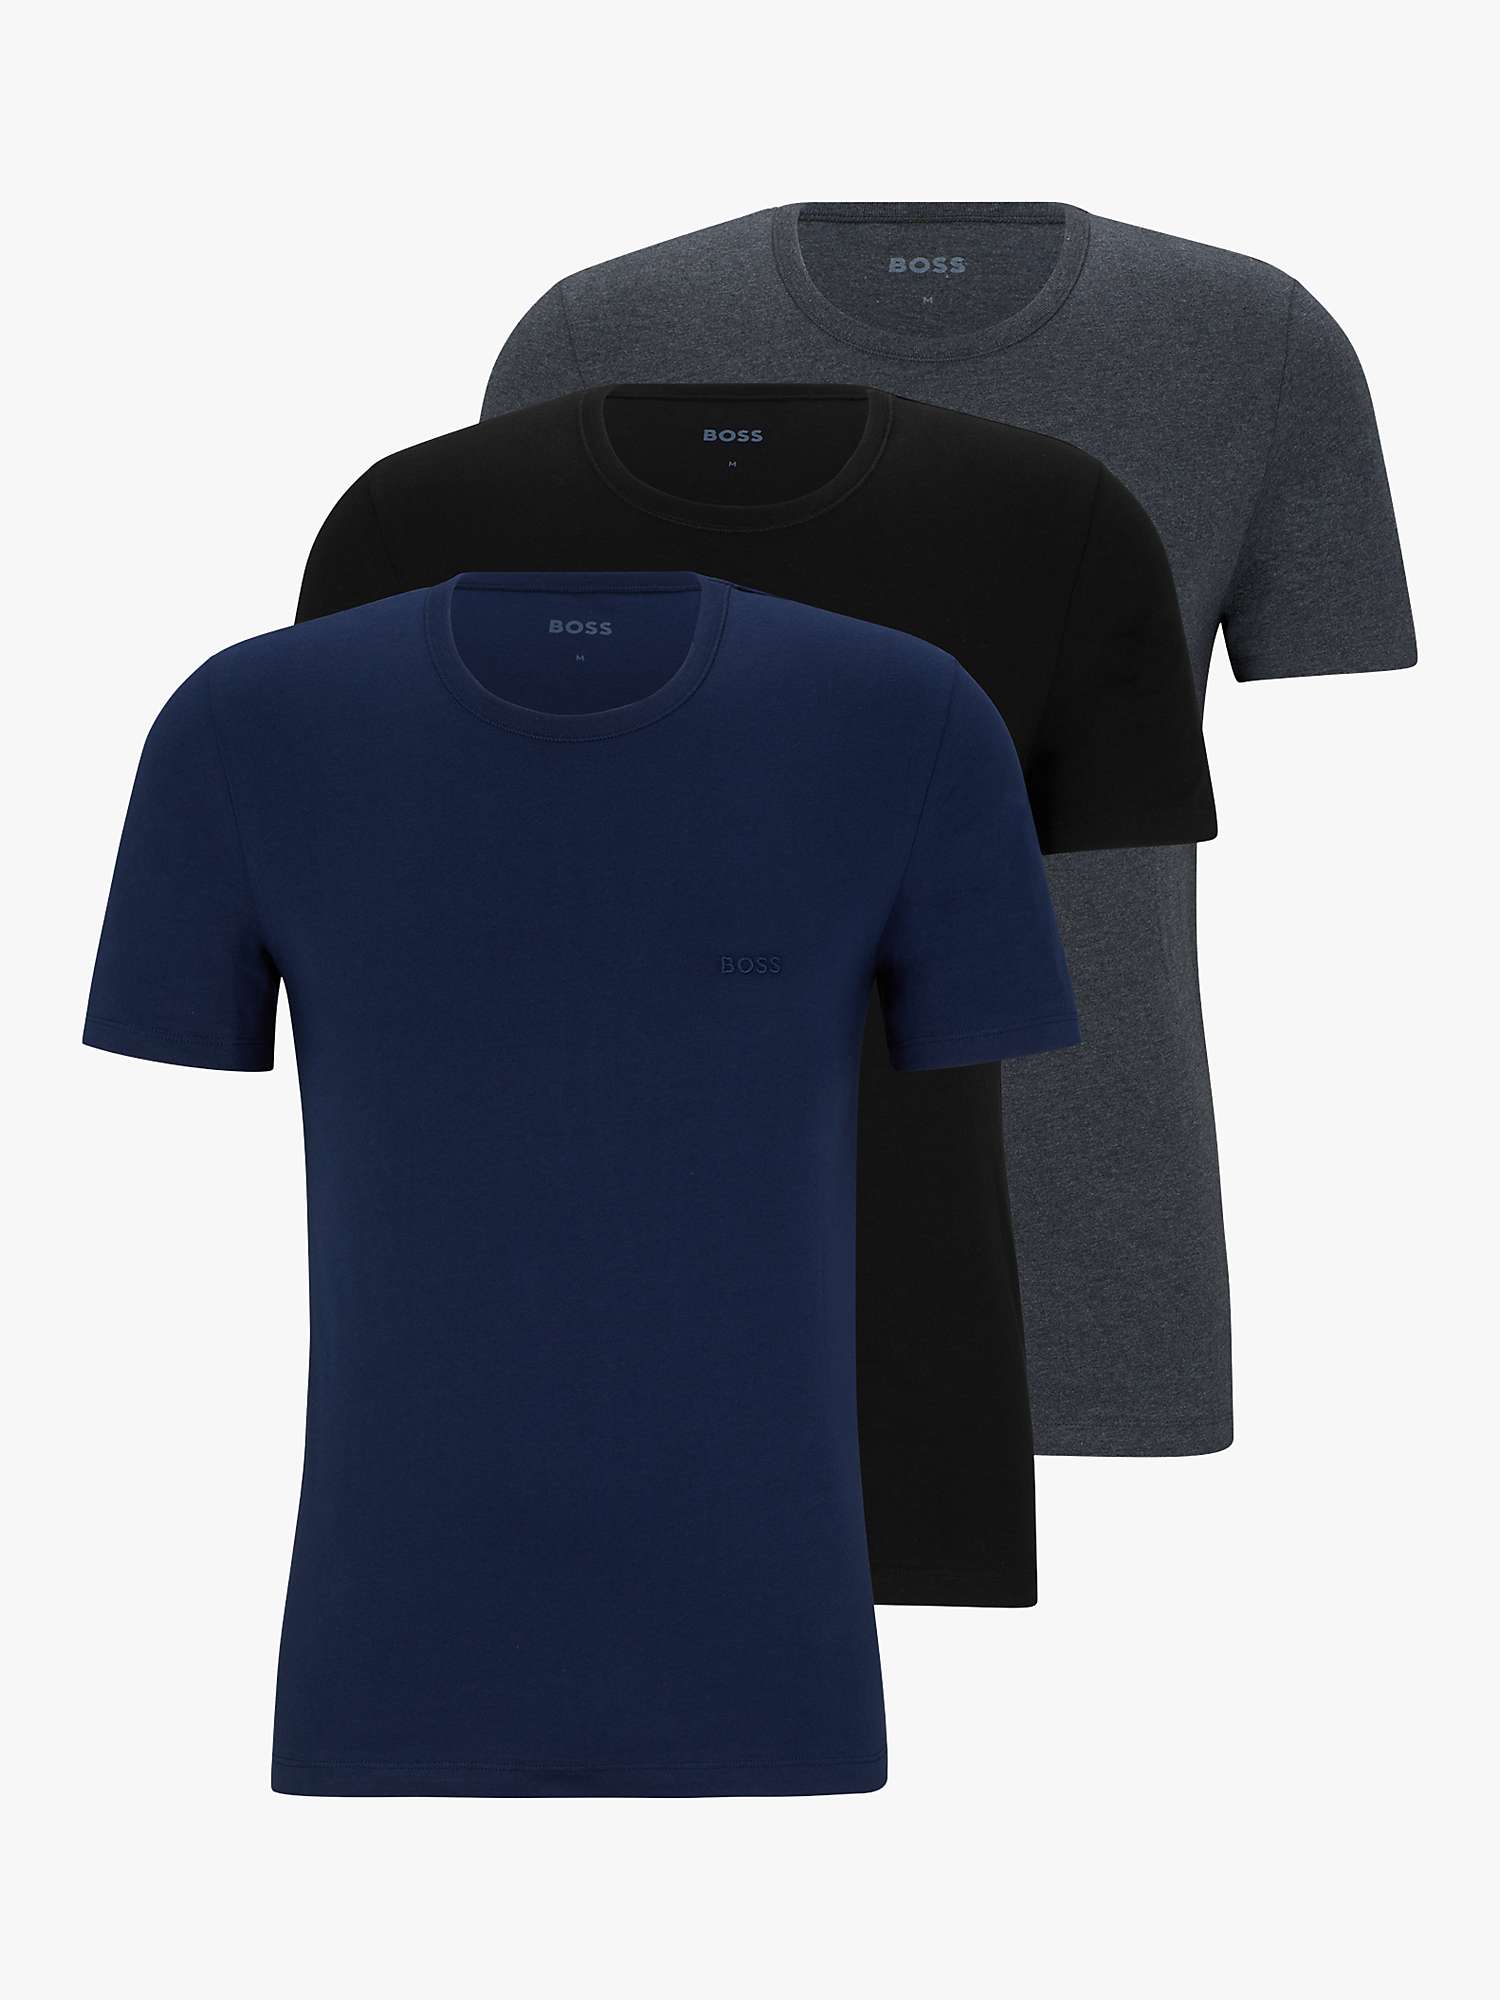 Buy HUGO BOSS Embroidered logo Cotton T-shirt, Pack of 3, Open Blue/Multi Online at johnlewis.com